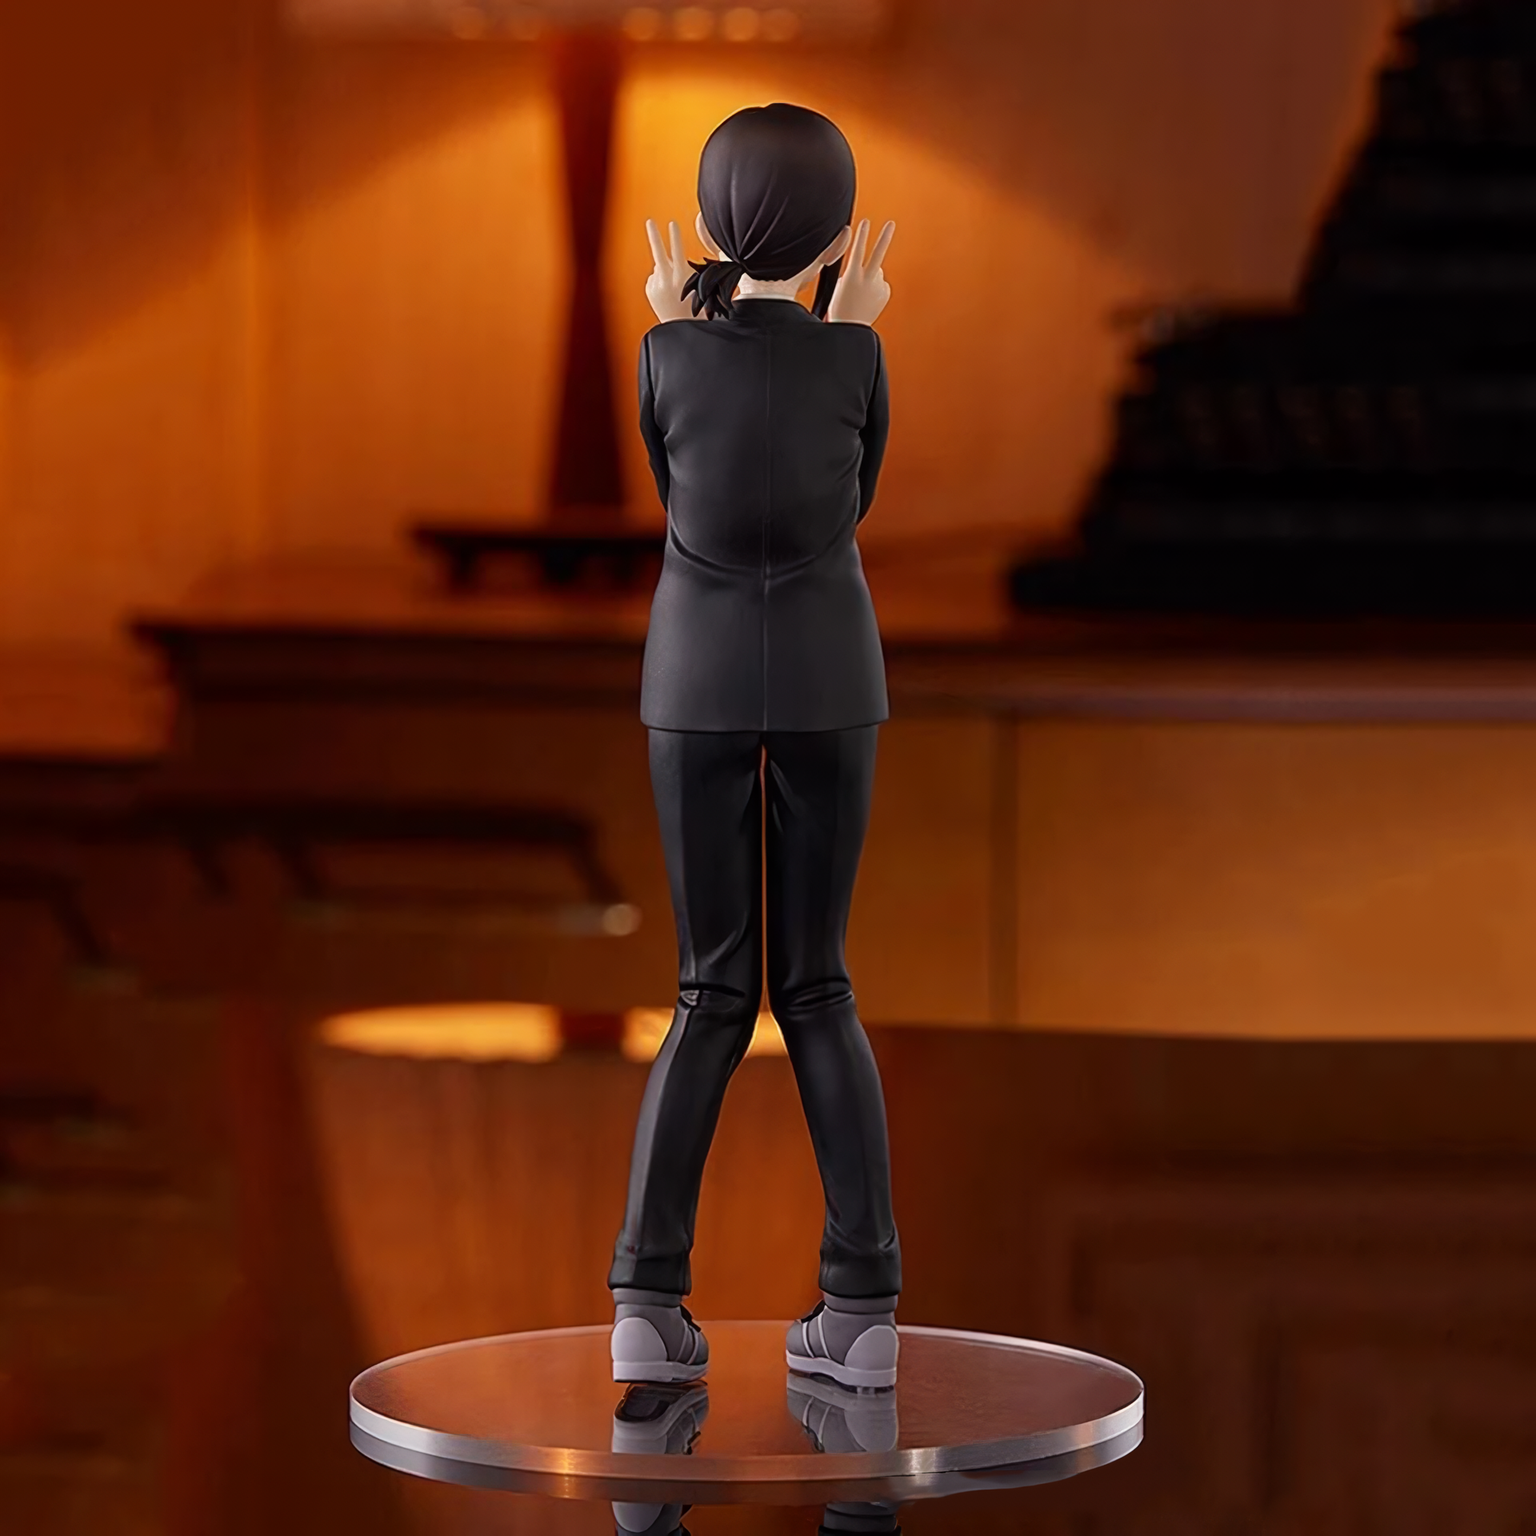 <div><br></div> <div> <p data-mce-fragment="1">Panic with Kobeni with our Kobeni - Chainsaw Man figurine!</p> <p data-mce-fragment="1">This figurine captures Kobeni in her most panicy form!</p> <p data-mce-fragment="1">Add it to your collection and feel the excitement of the Chainsaw Man cast in your own home!</p> </div>